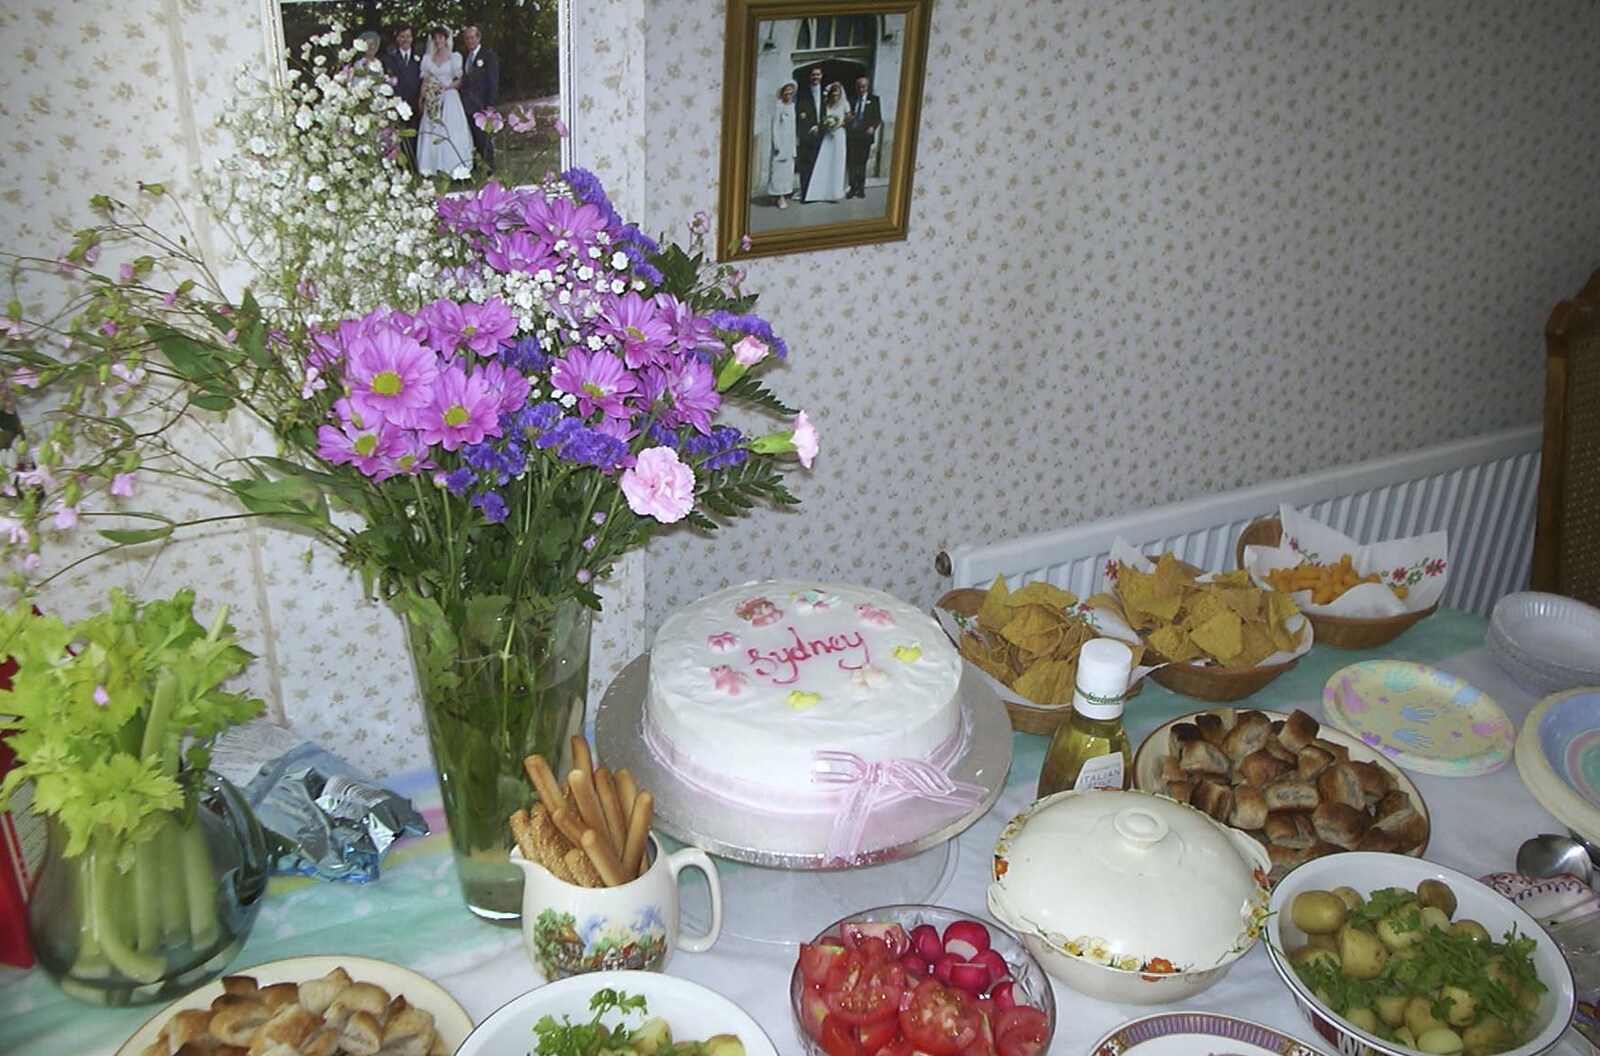 Food and a cake is laid on from Sydney's Christening, Hordle, Hampshire - 4th May 2002